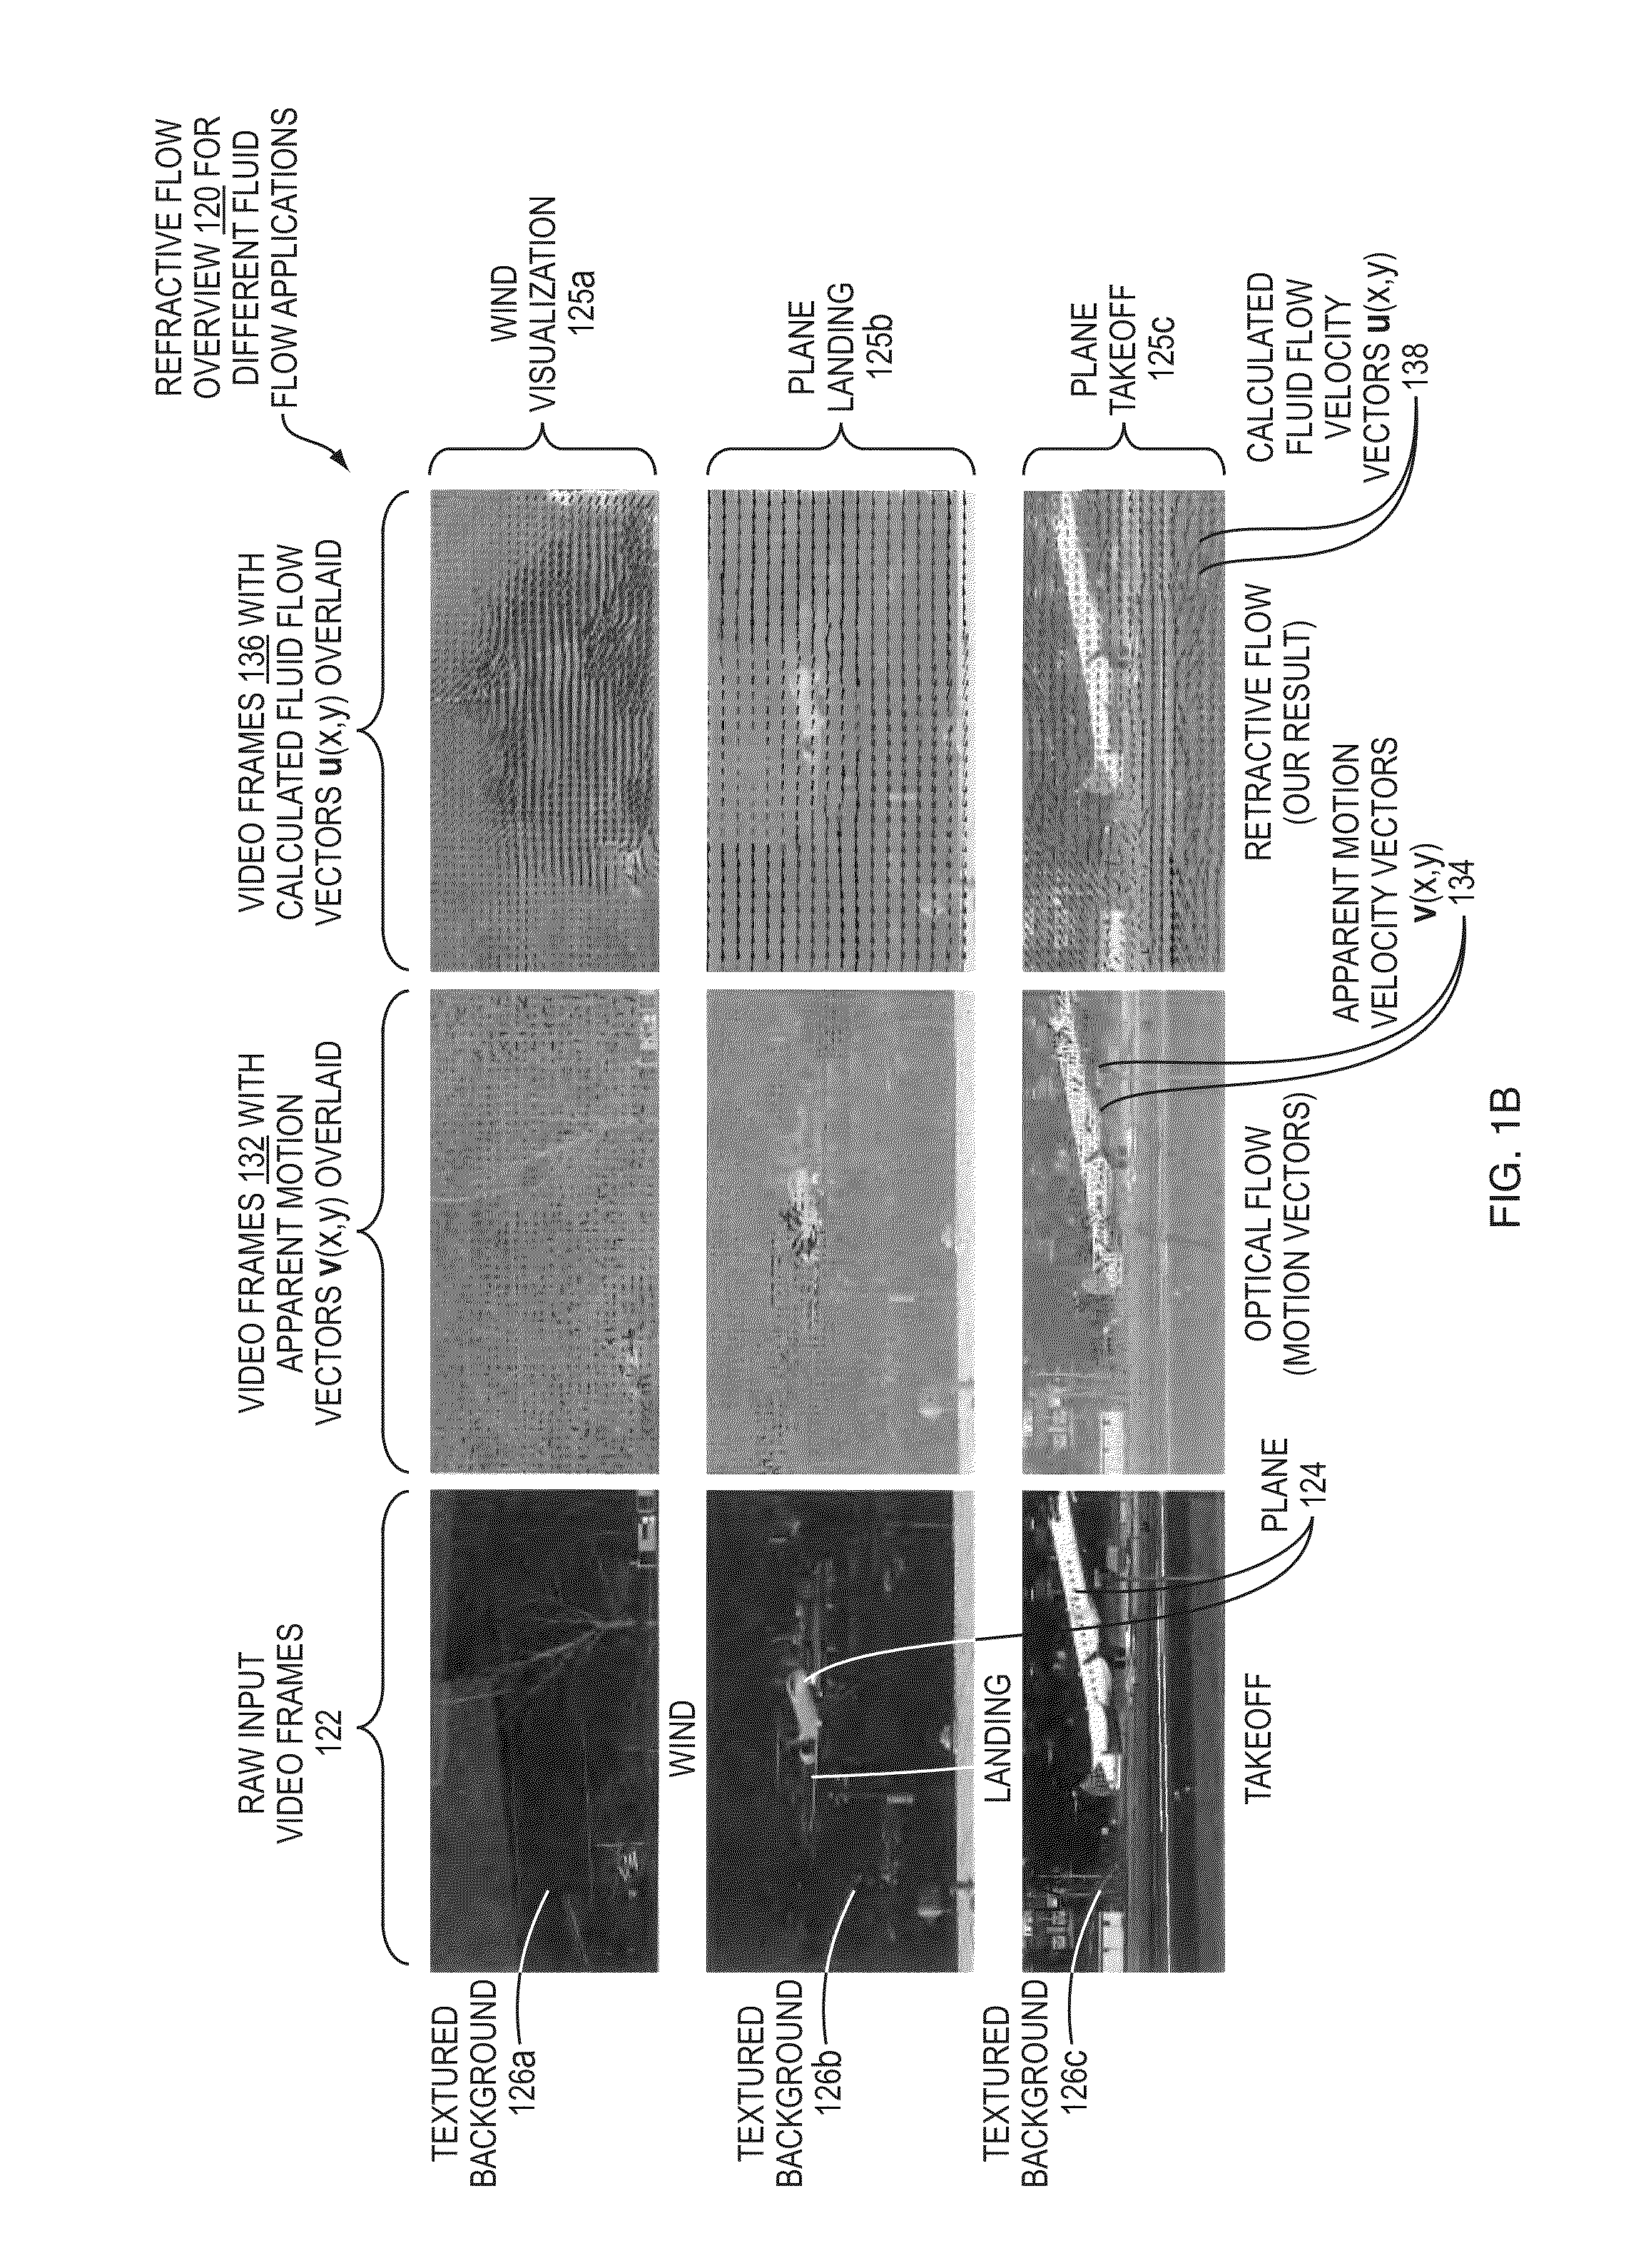 Methods and apparatus for refractive flow measurement with three dimensions and uncertainty